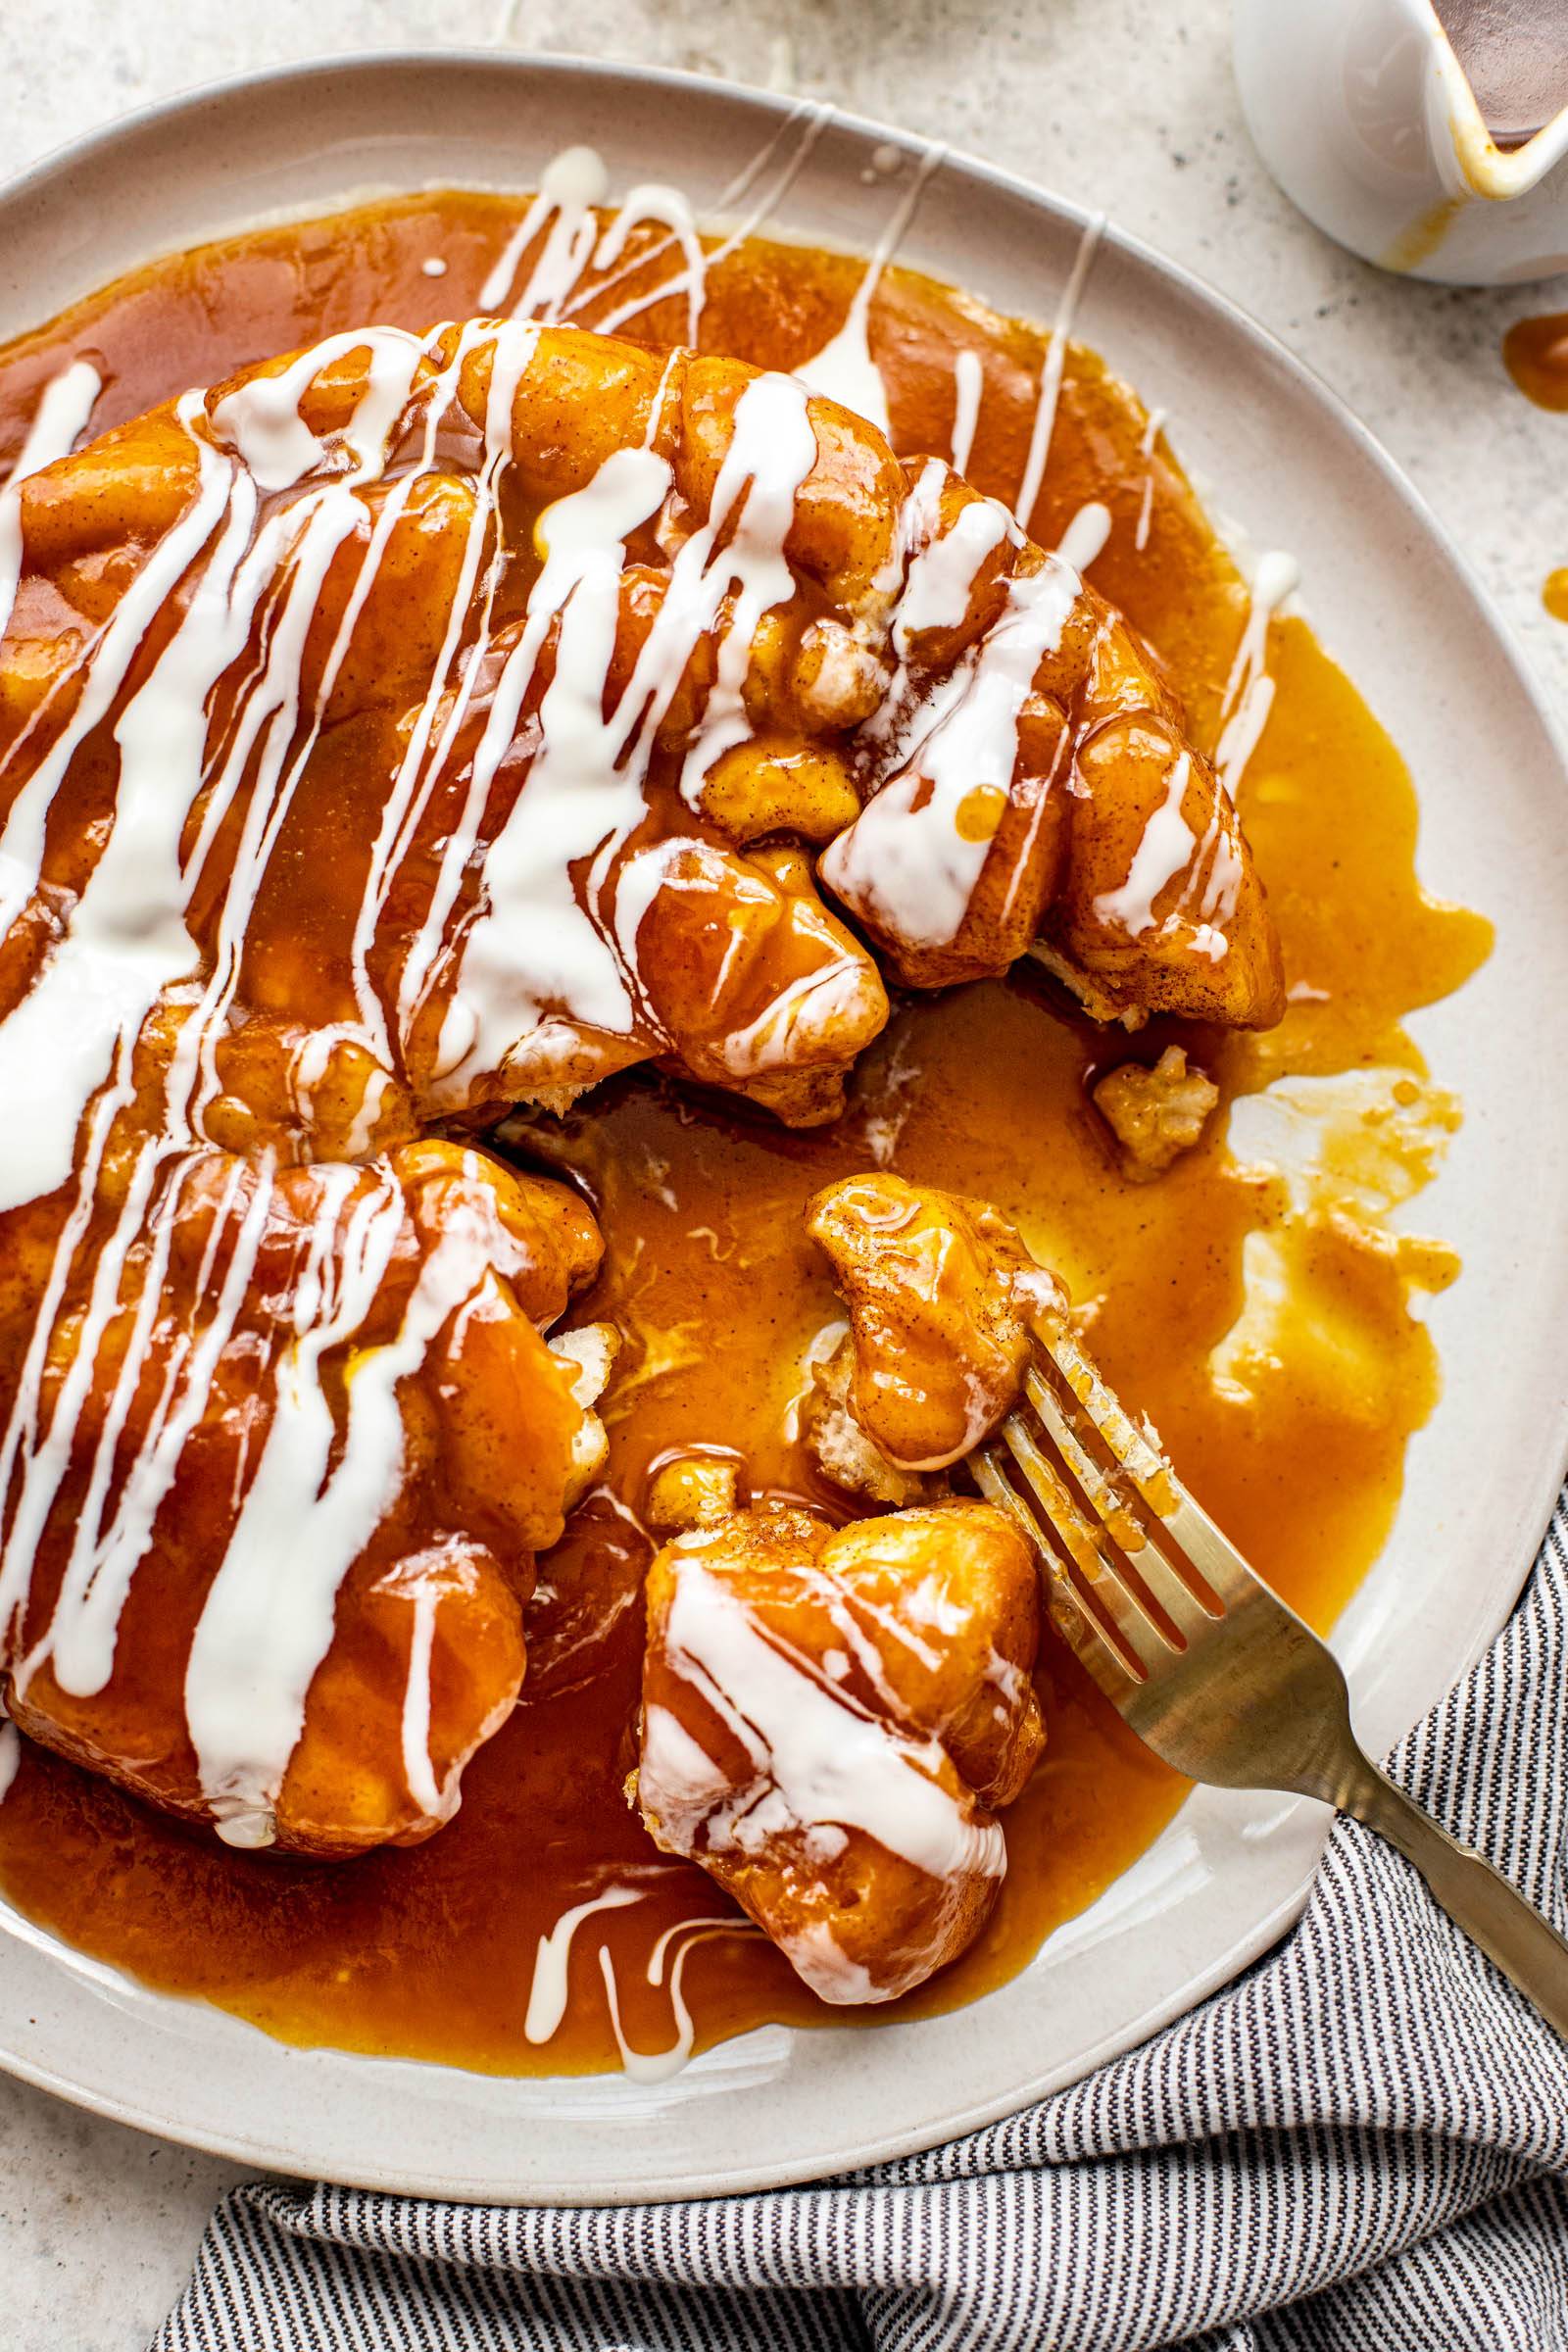 White chocolate drizzled on top of pumpkin caramel monkey bread.